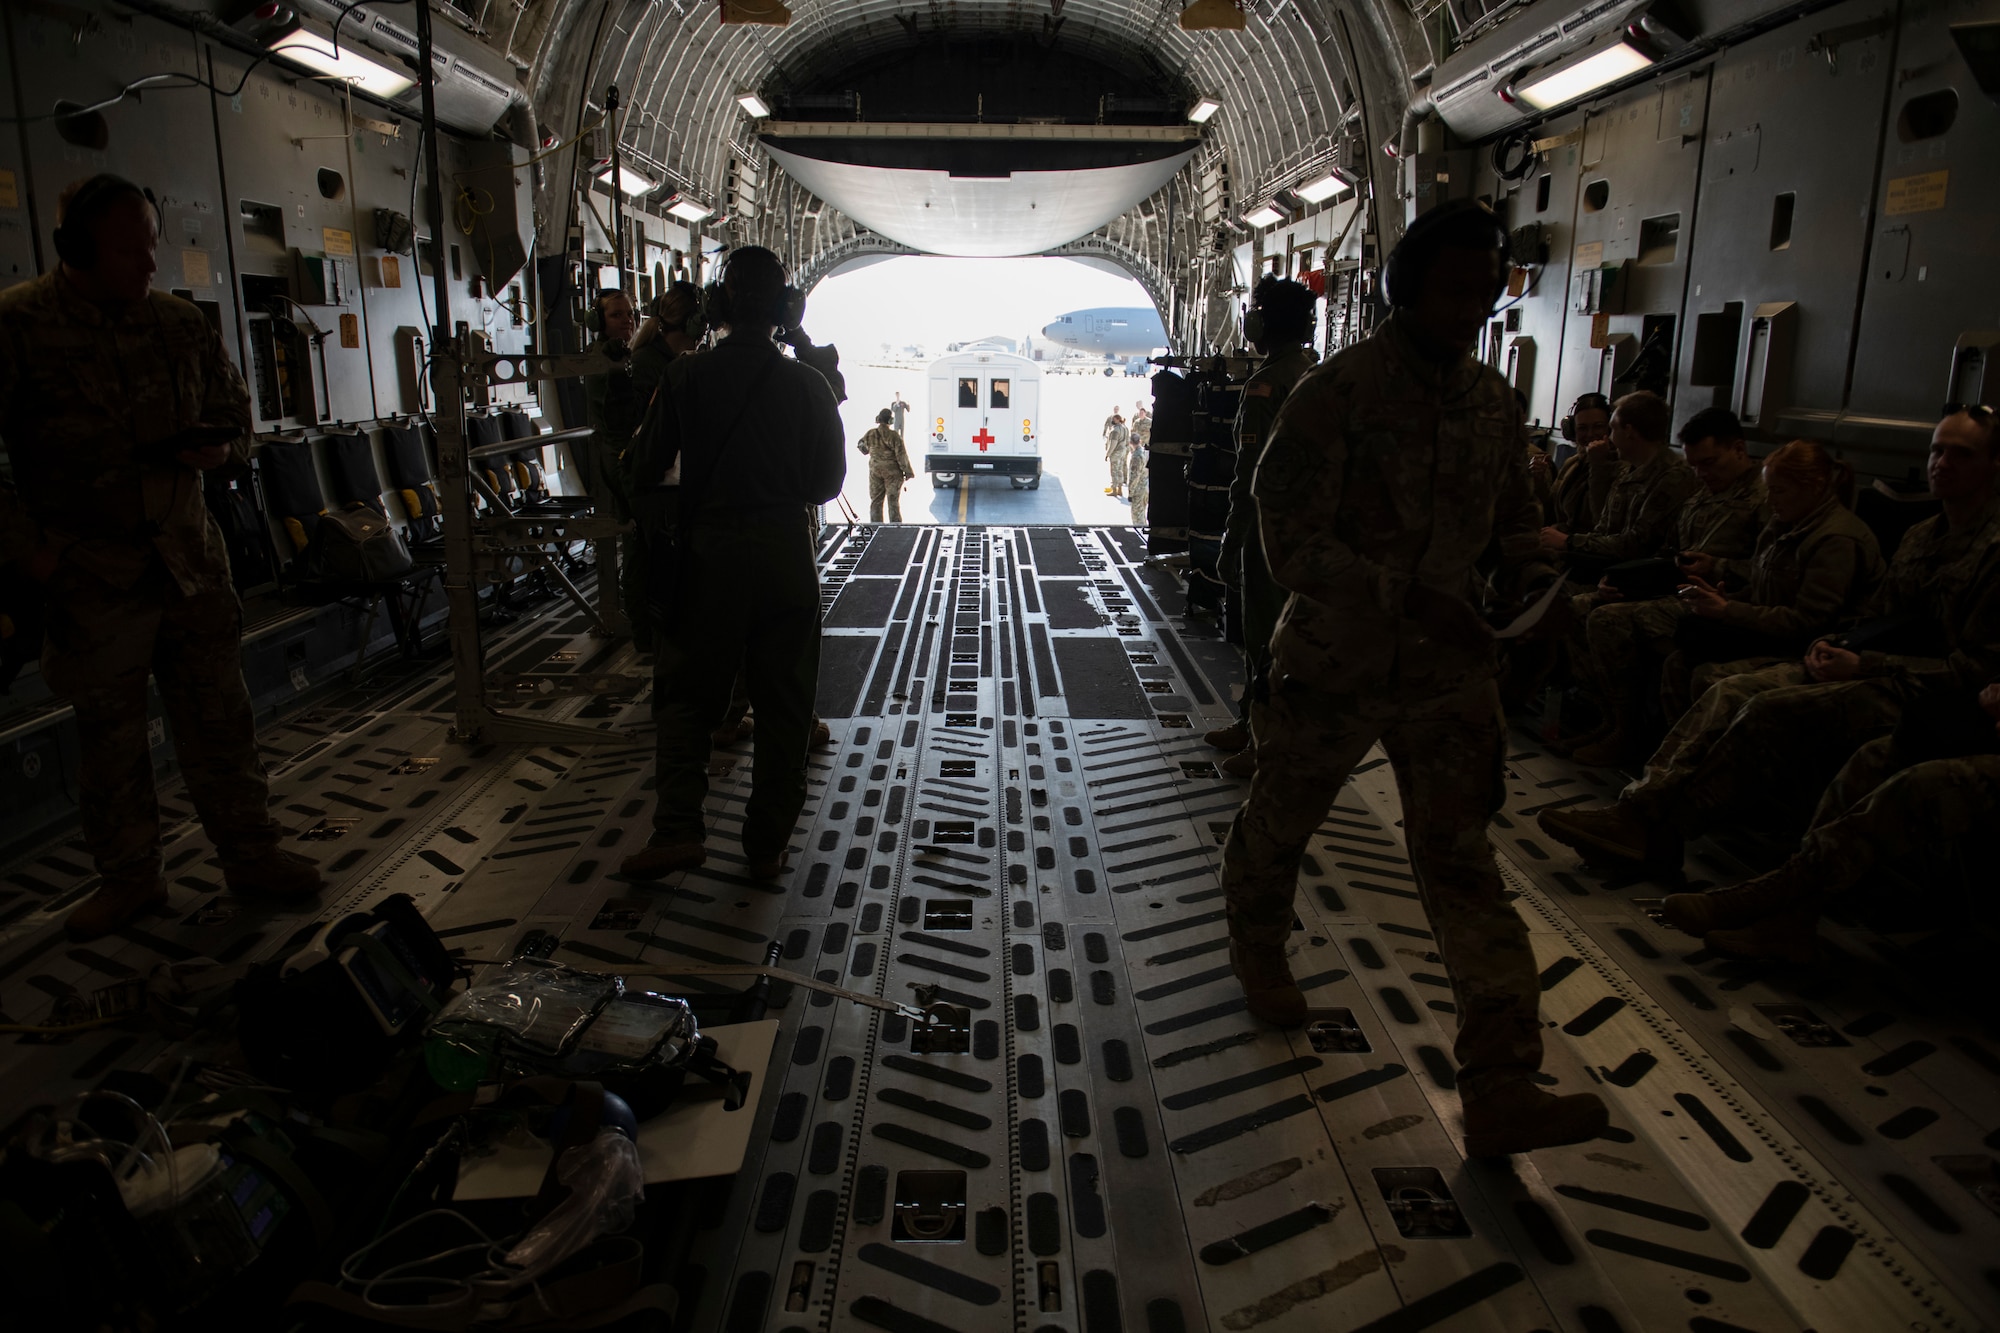 Airmen in an aircraft with shuttle at cargo entrance.